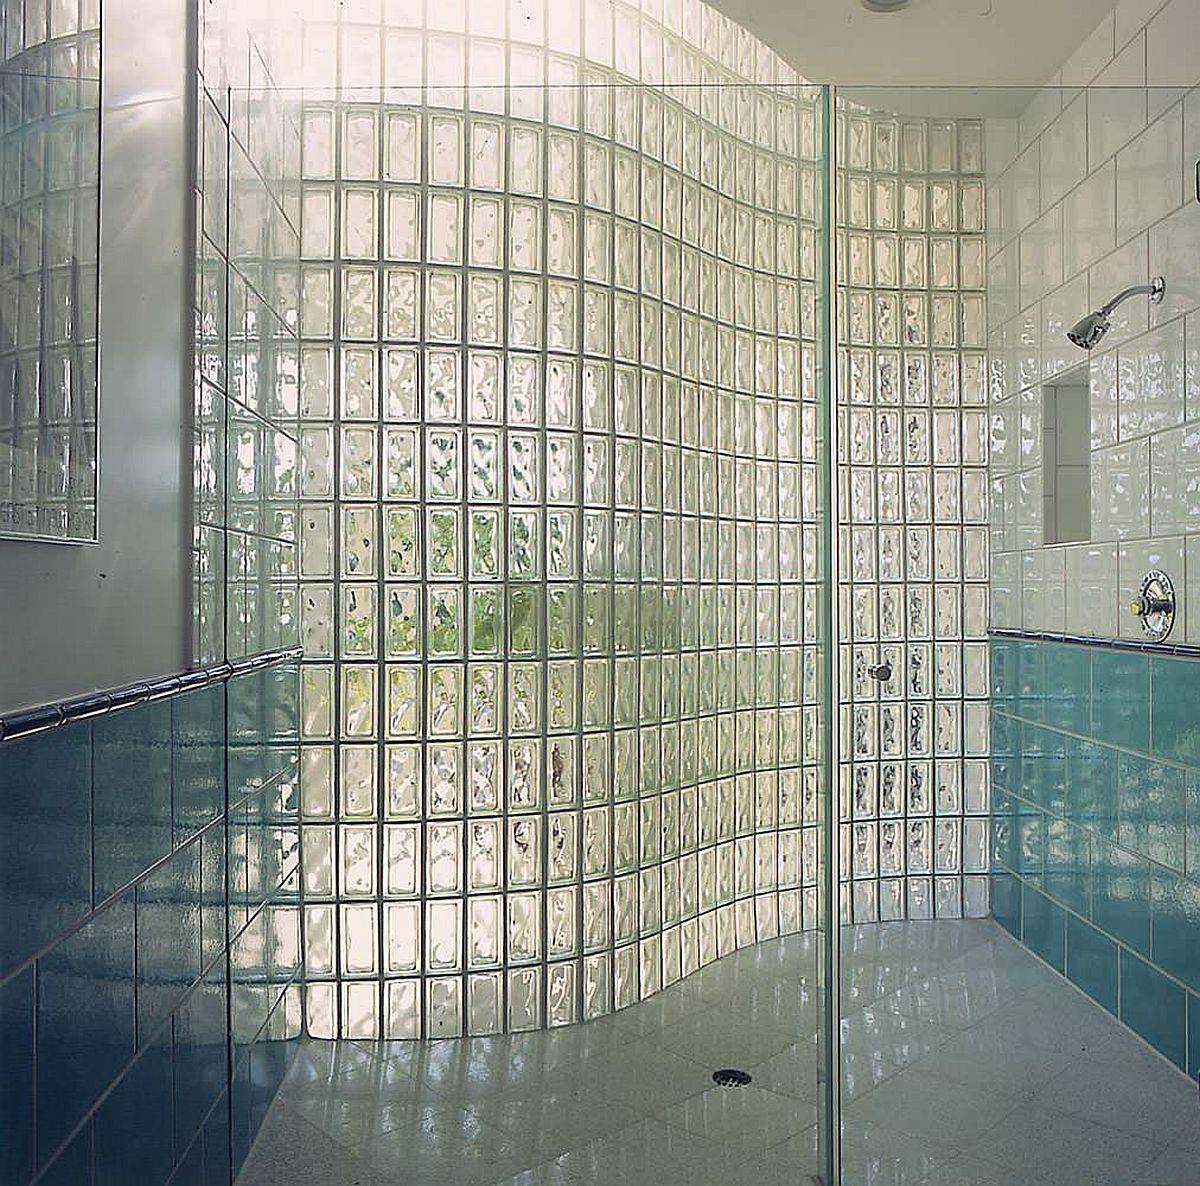 Fabulous-curved-glass-block-wall-for-th-shower-area-of-the-blue-and-white-modern-bathroom-40926